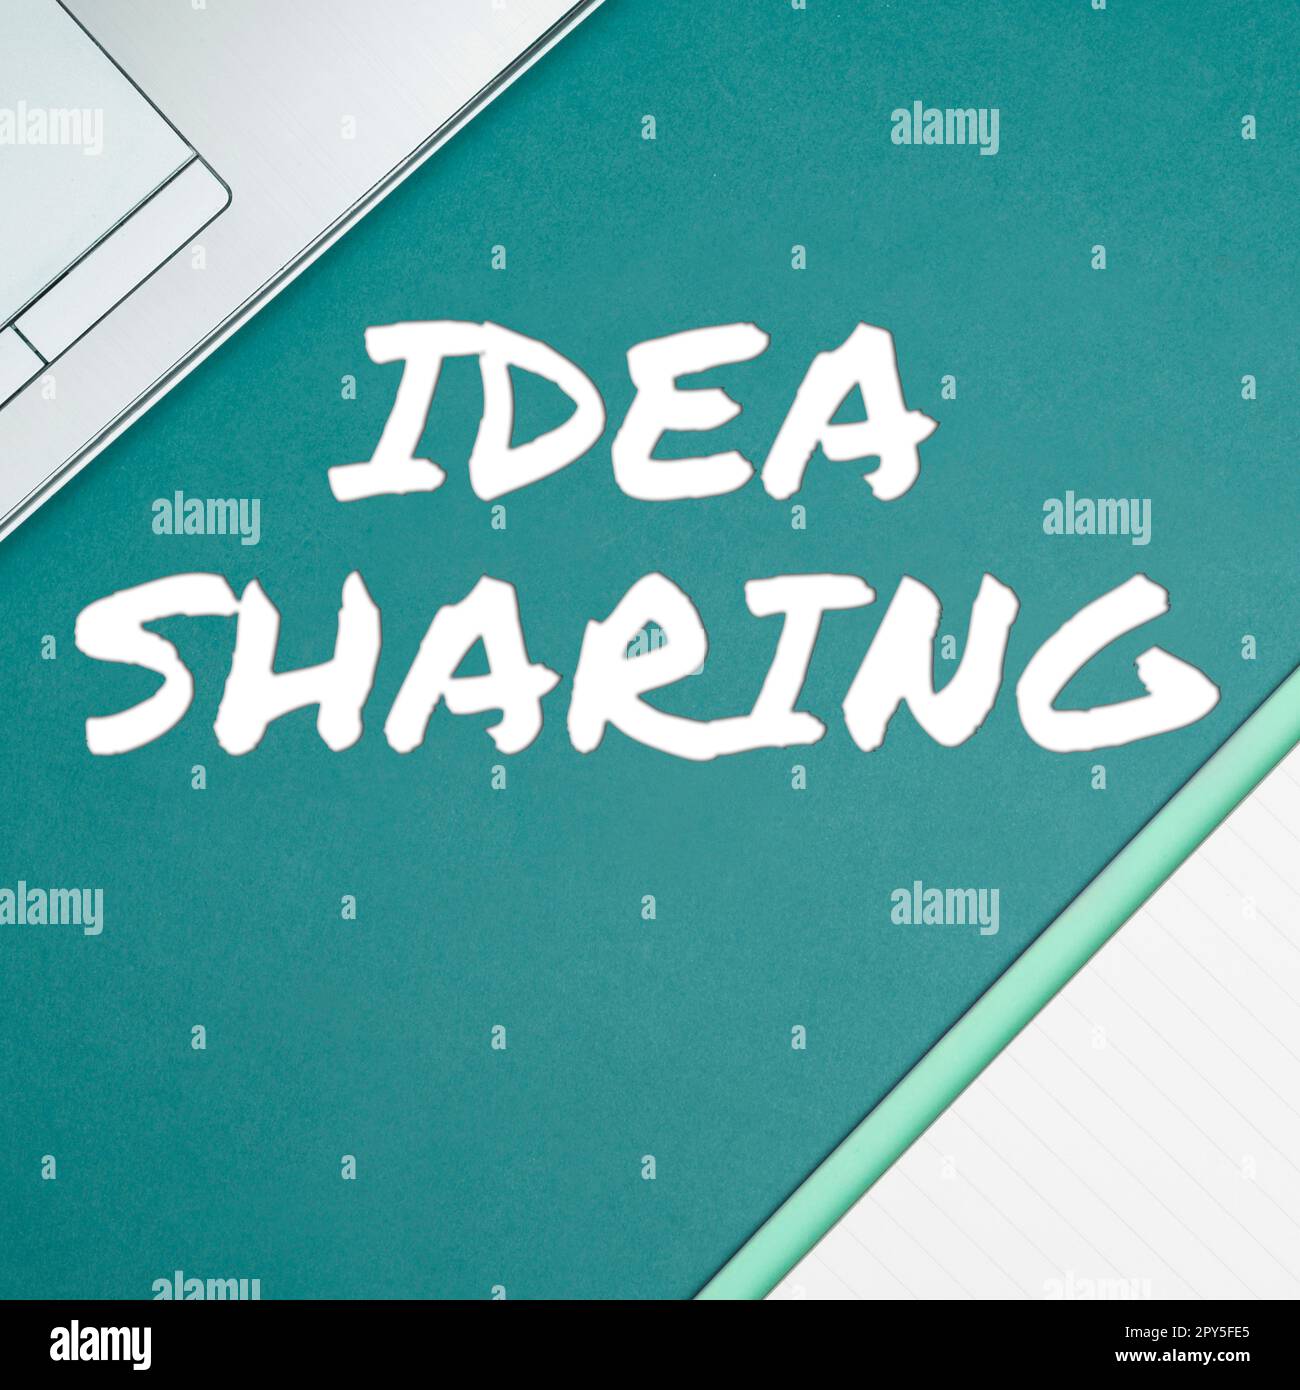 Inspiration showing sign Idea Sharing. Concept meaning Startup launch innovation product, creative thinking Stock Photo